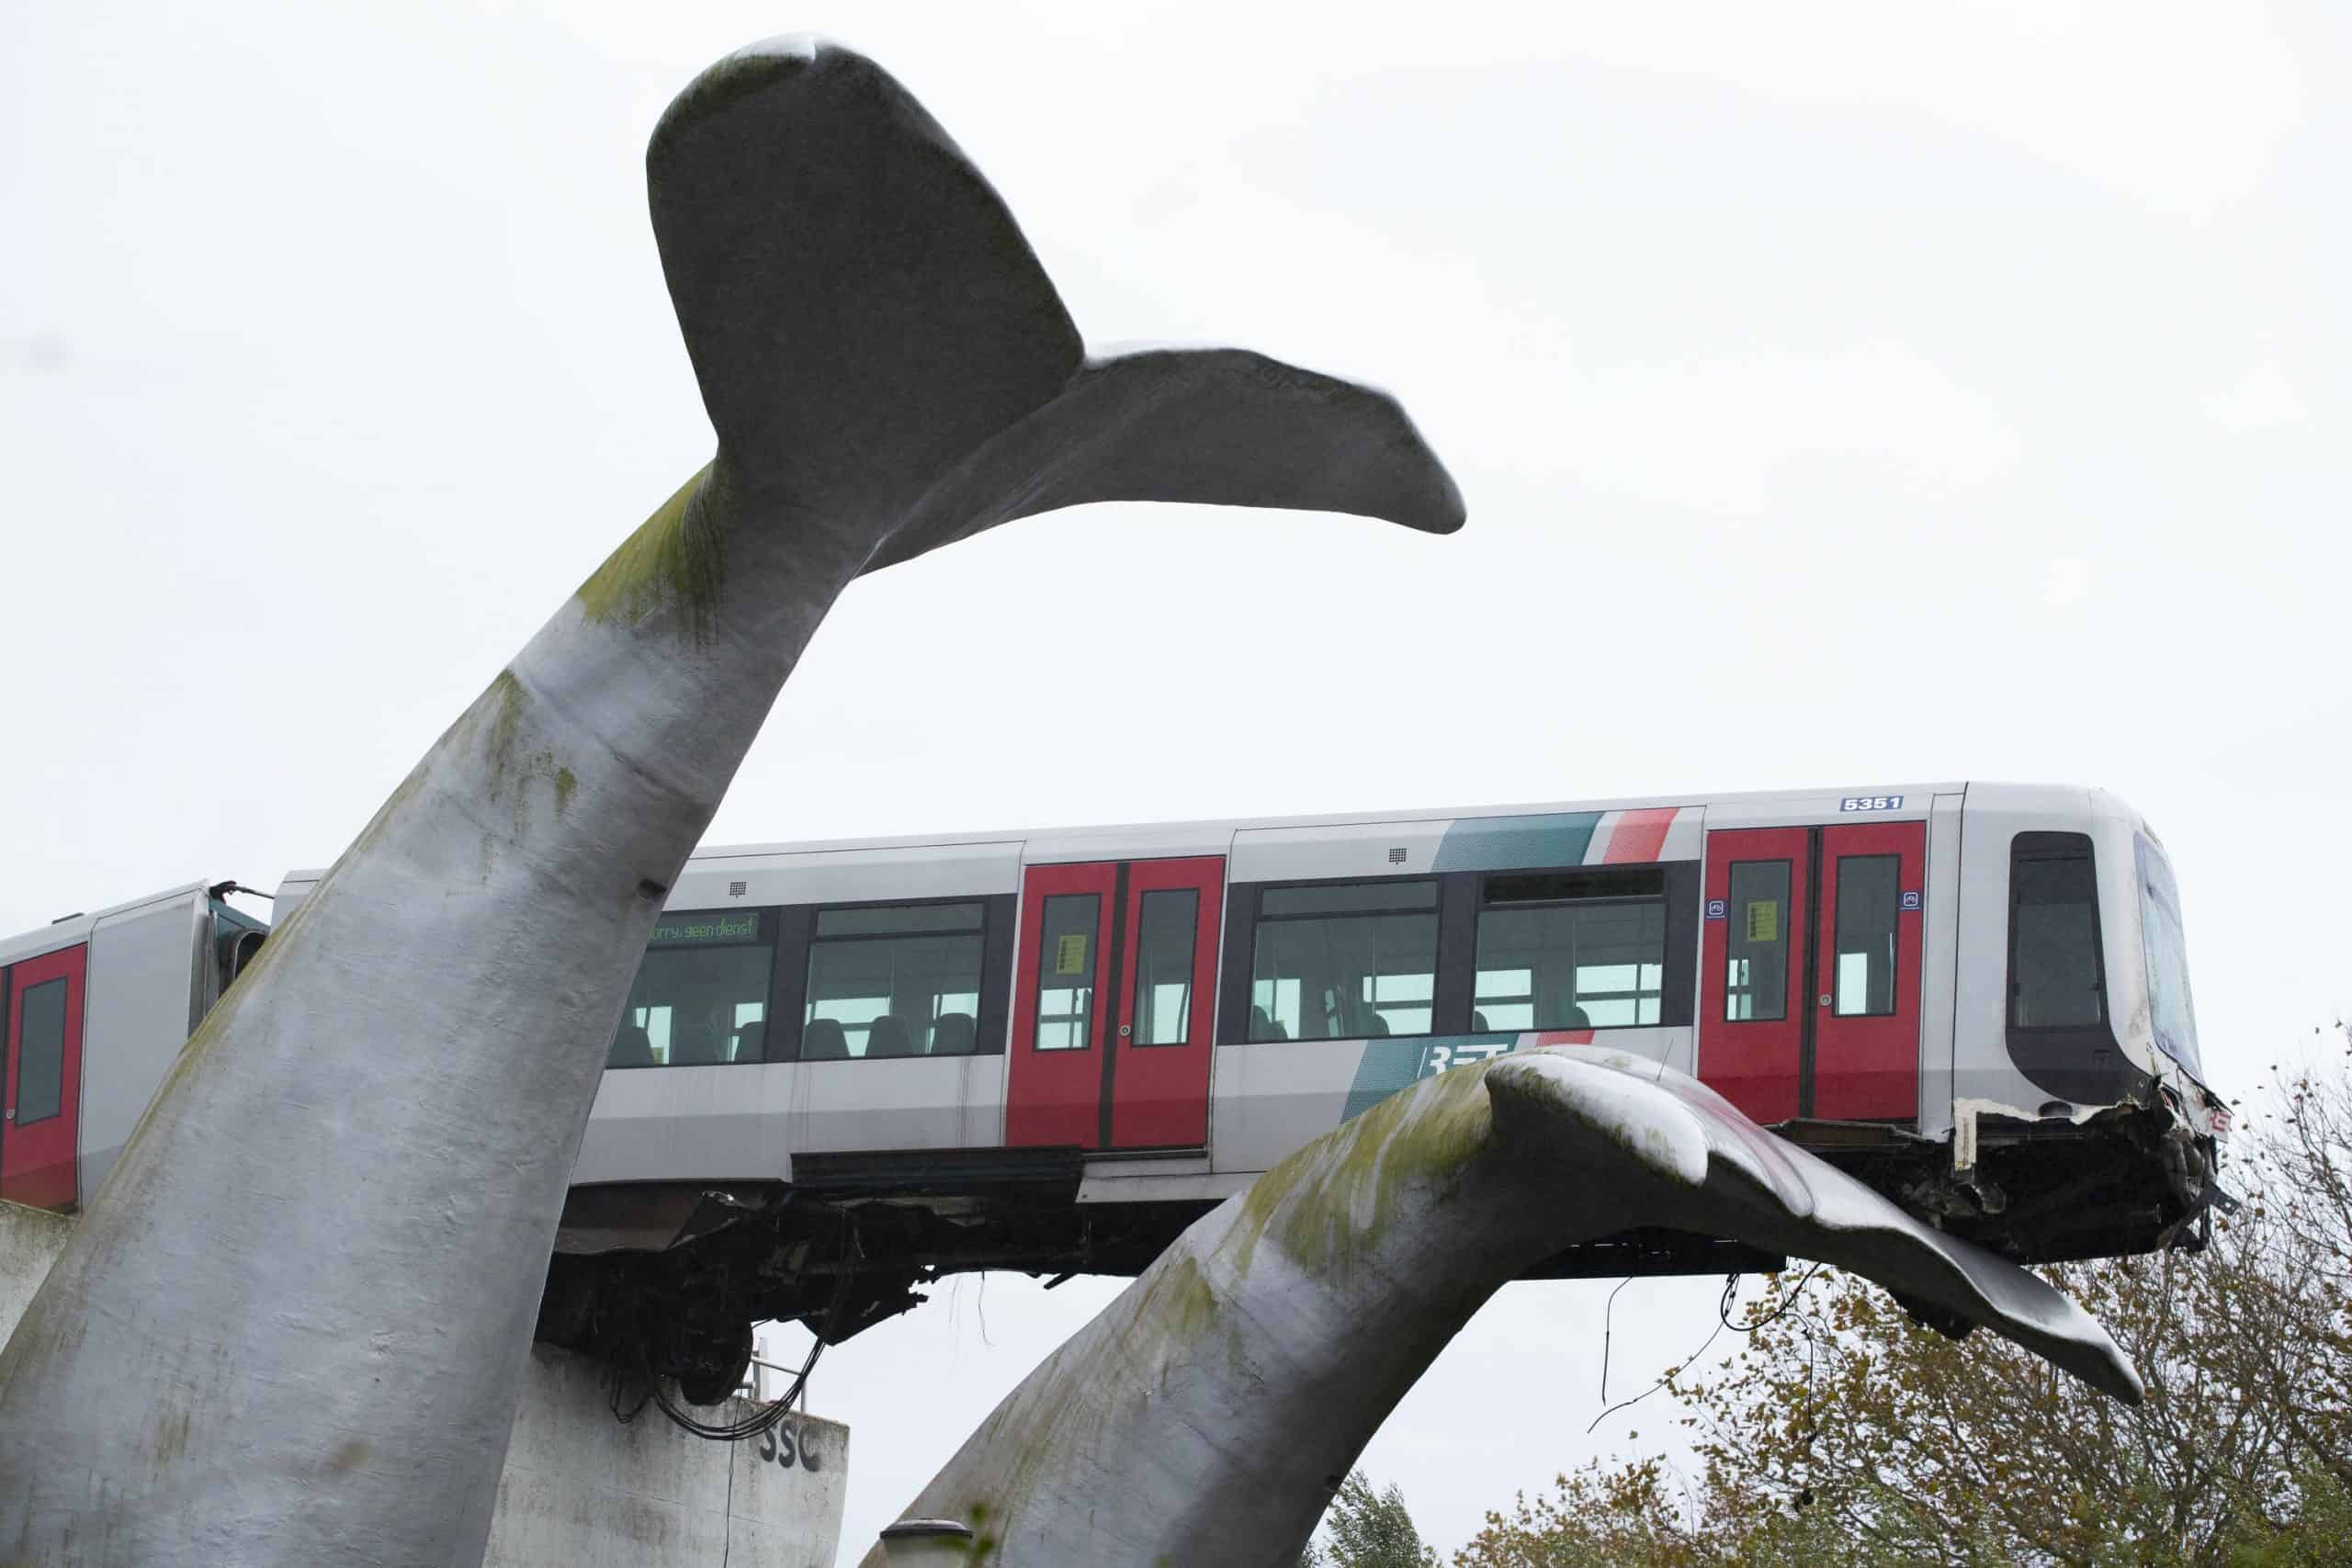 Sculpture of a whale’s tail saves careering train